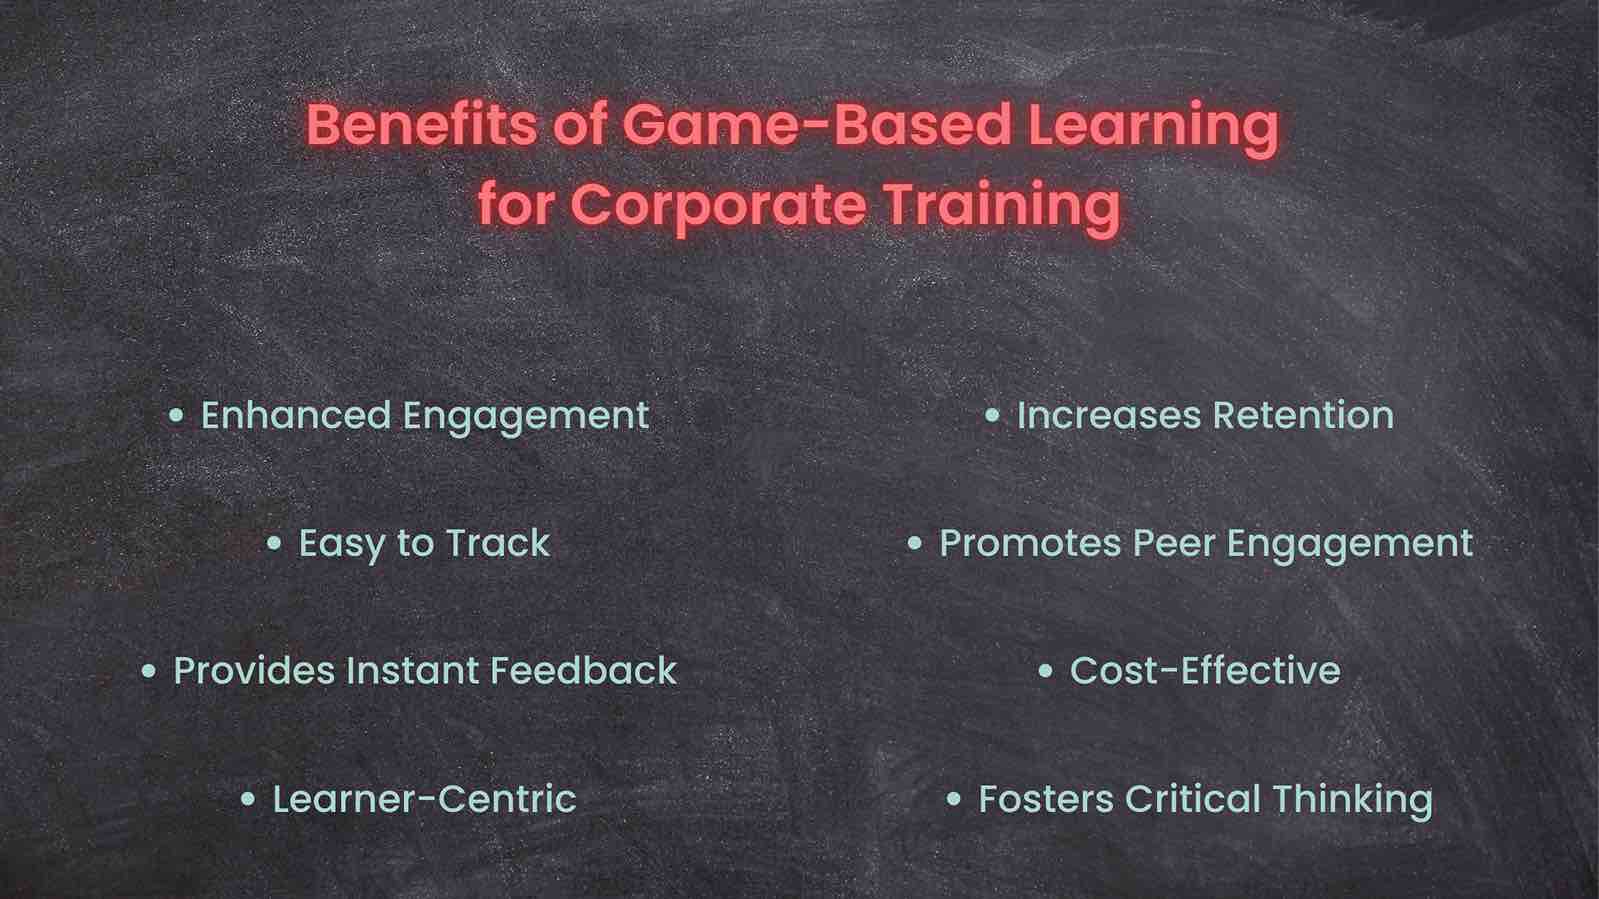 Why Game-based Learning is important?